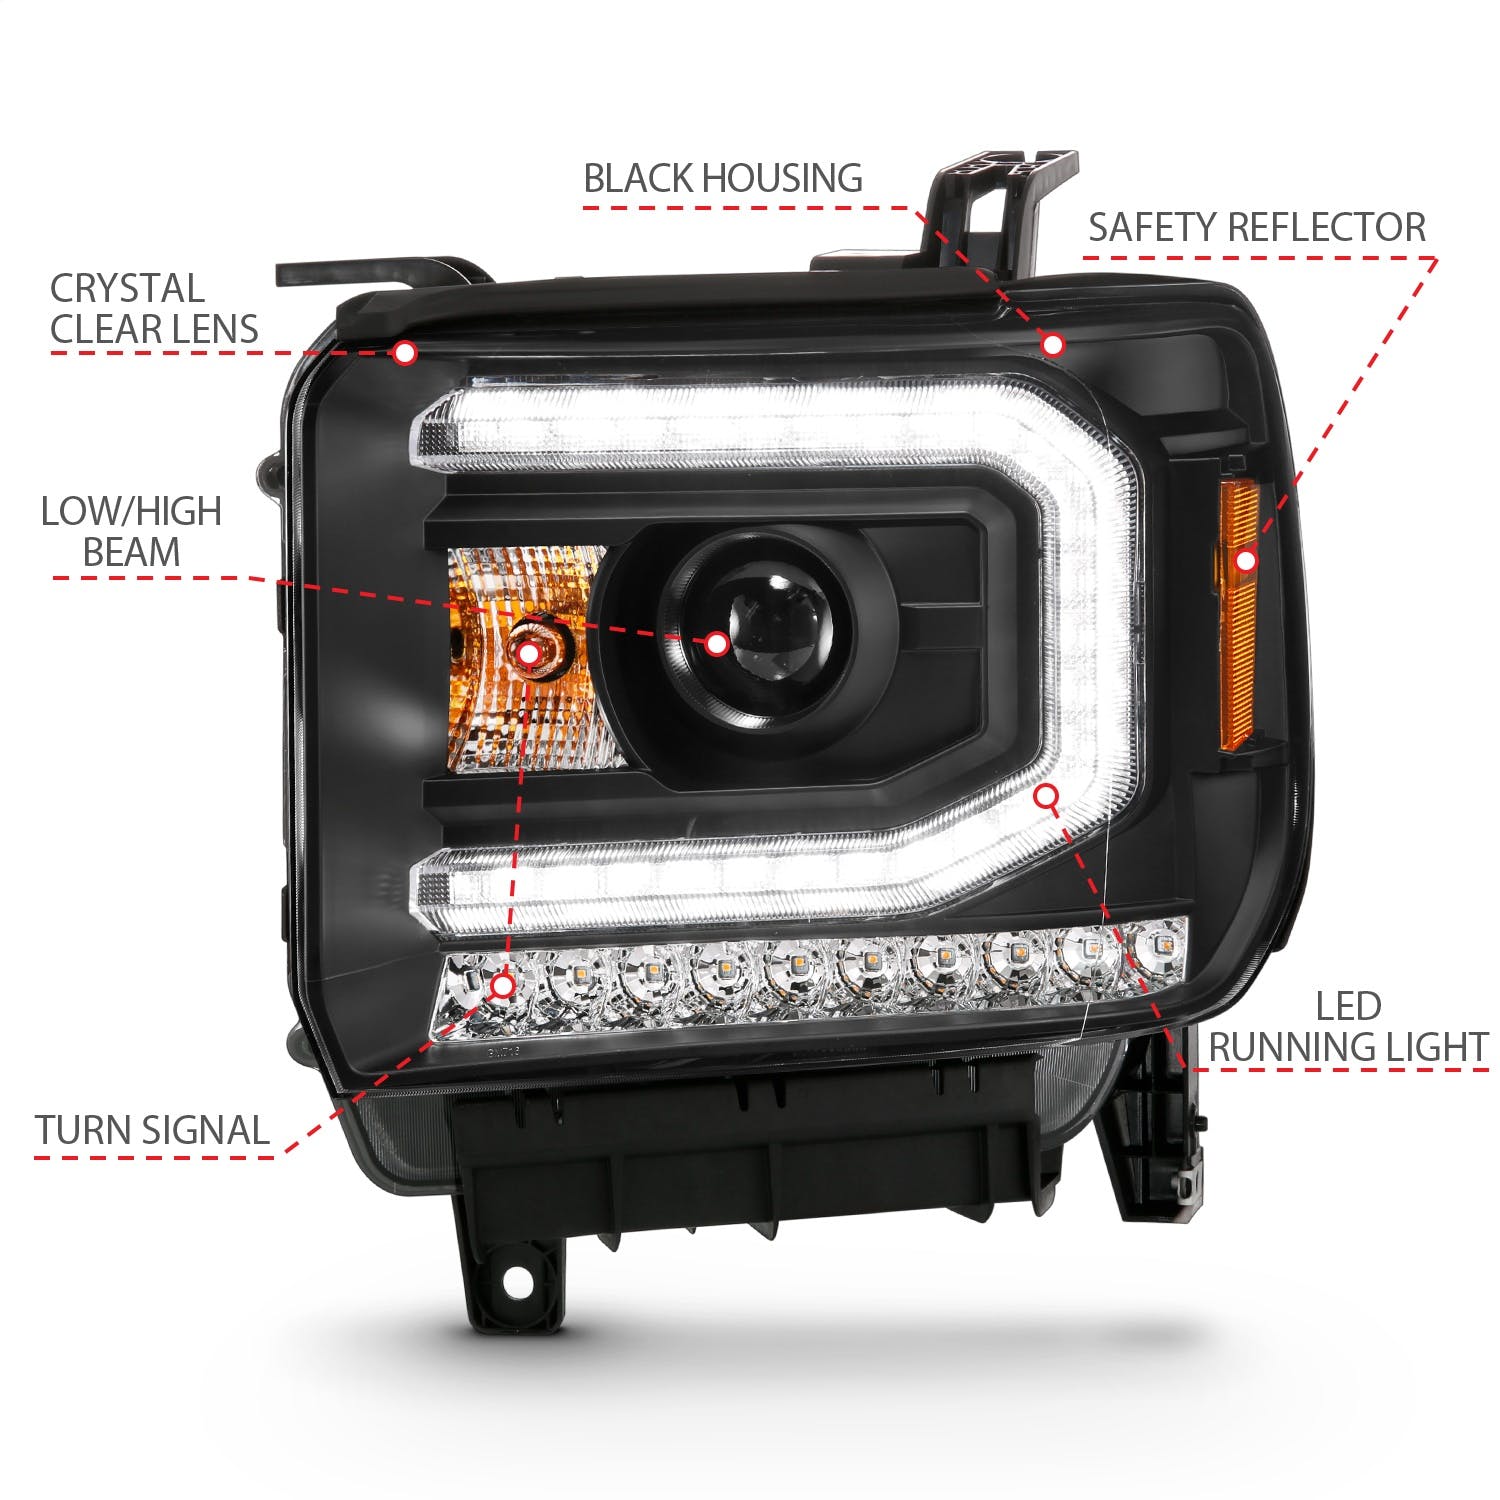 AnzoUSA 111485 Projector Headlight Plank Style Black, Sequential Amber Signal, HID Compatible